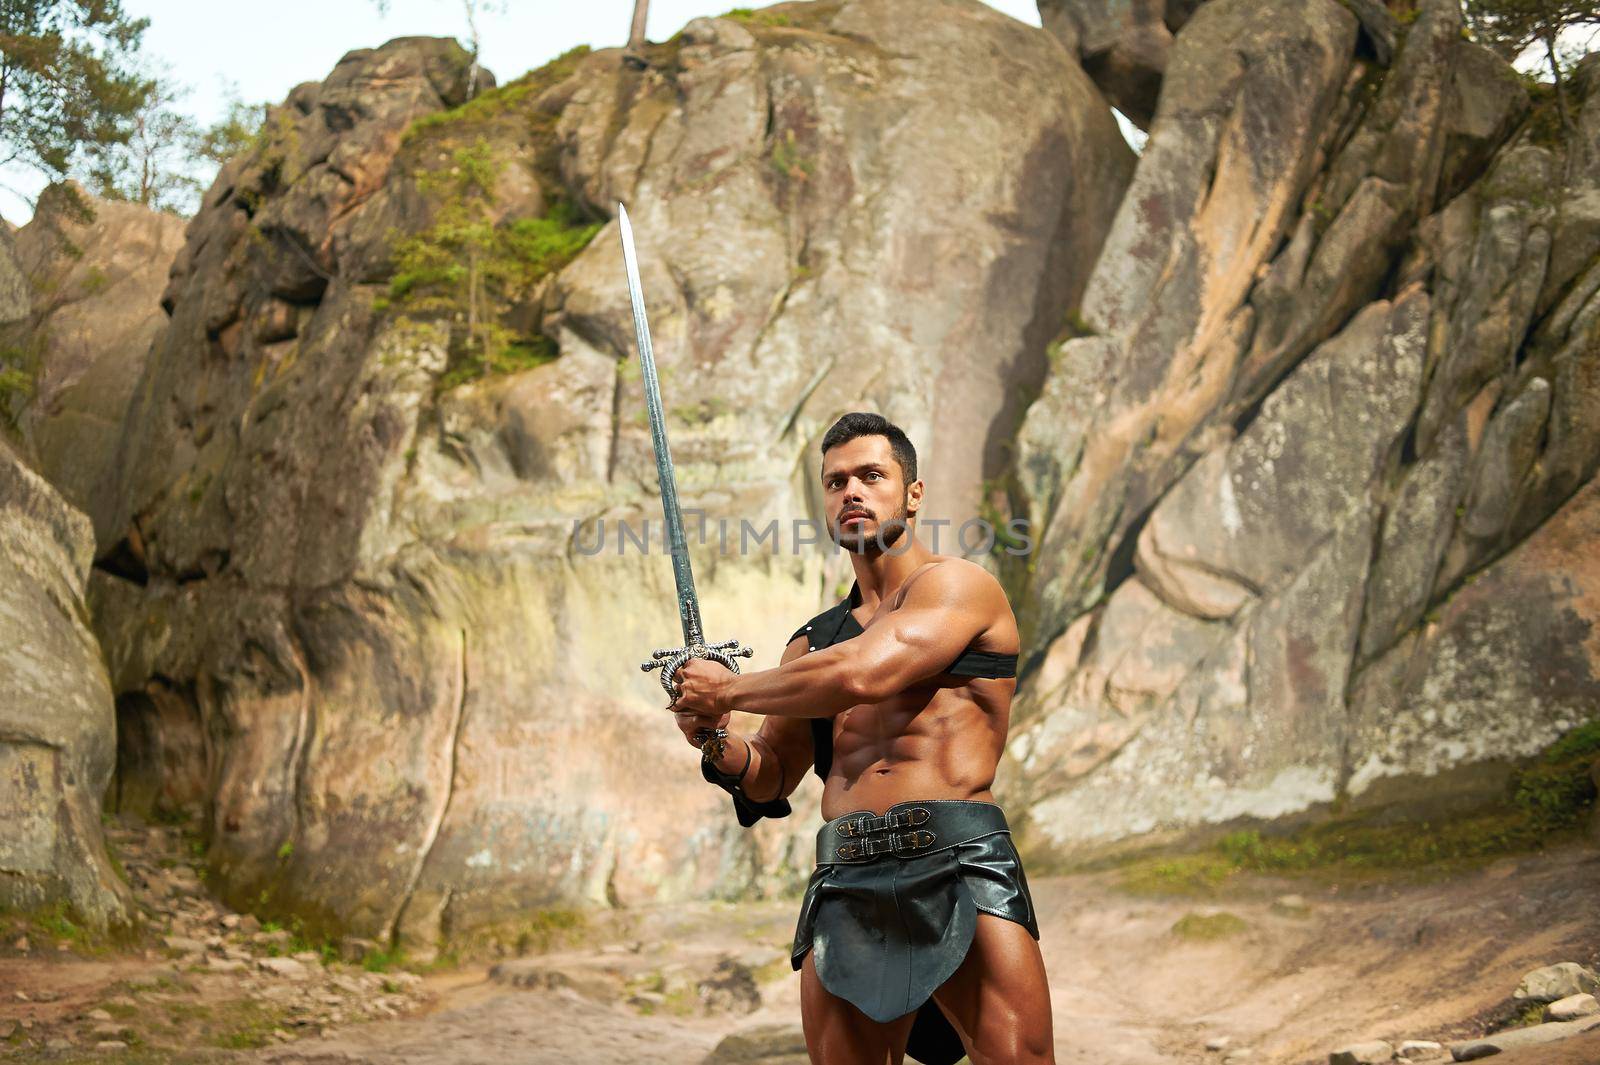 Not afraid to face his enemies. Brave young warrior with strong muscular body holding his sword standing near the rocks